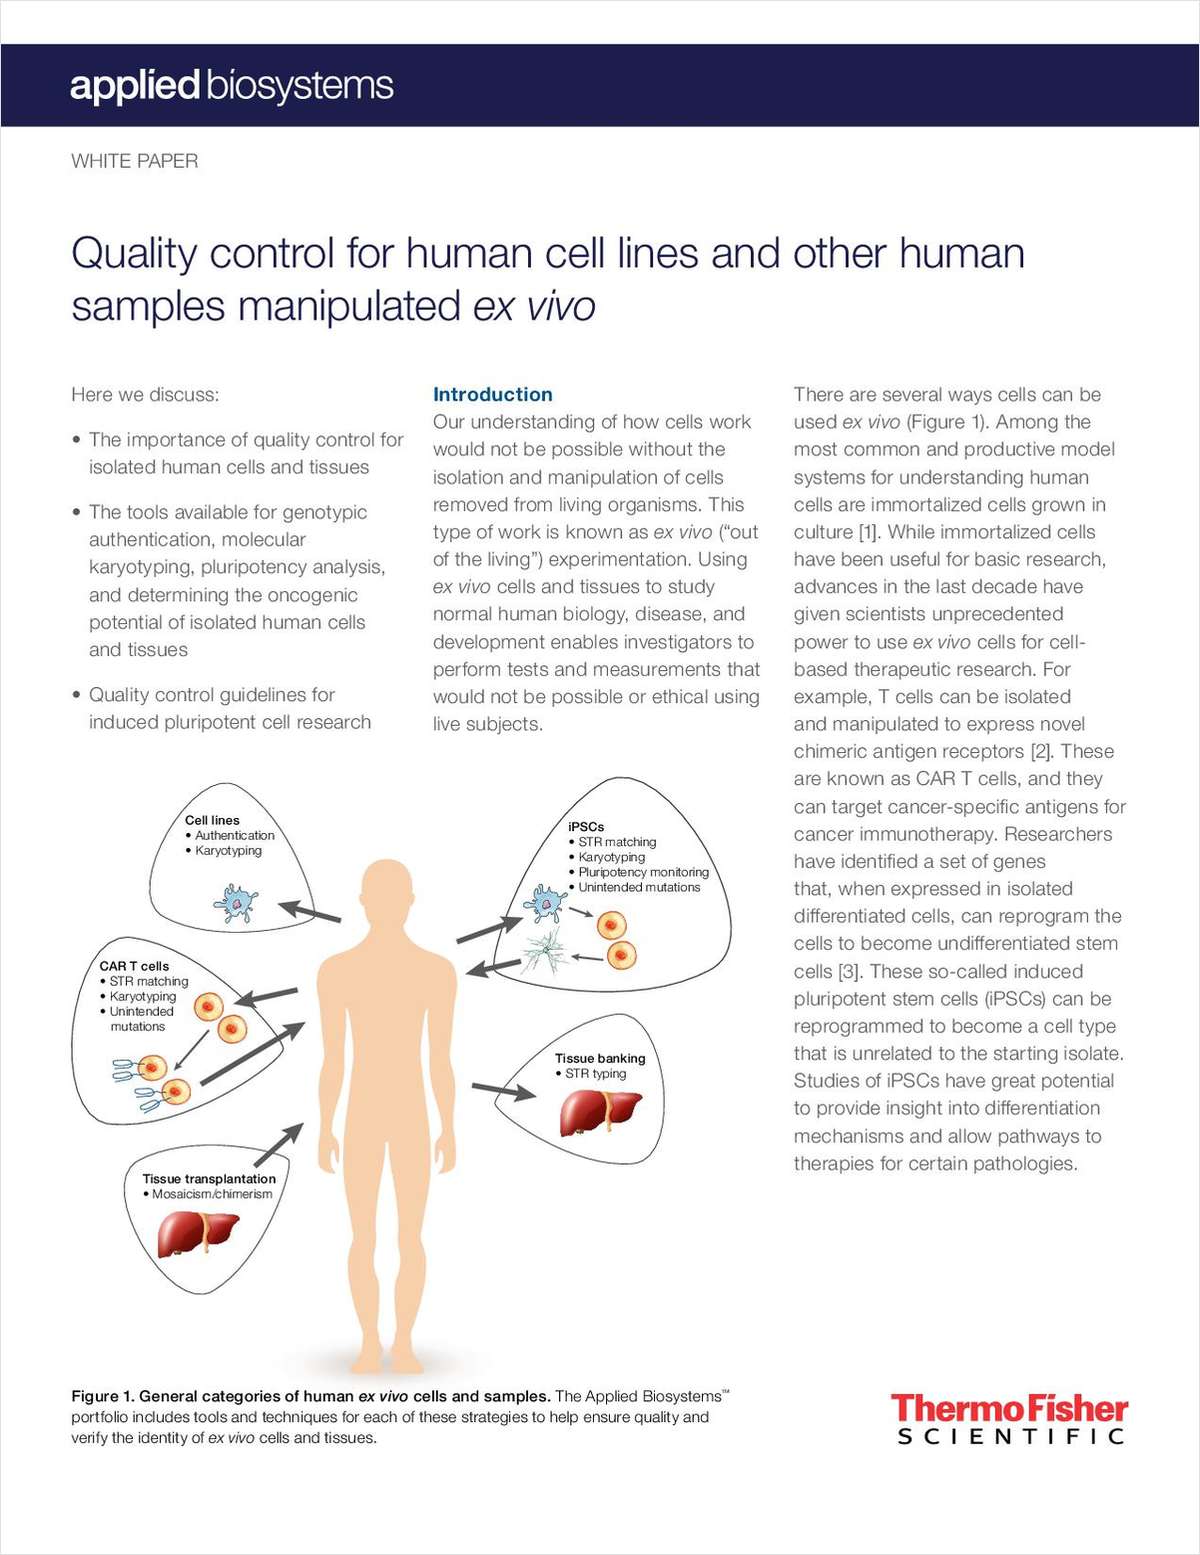 Quality Control for Human Cell Lines and Other Human Samples Manipulated Ex Vivo